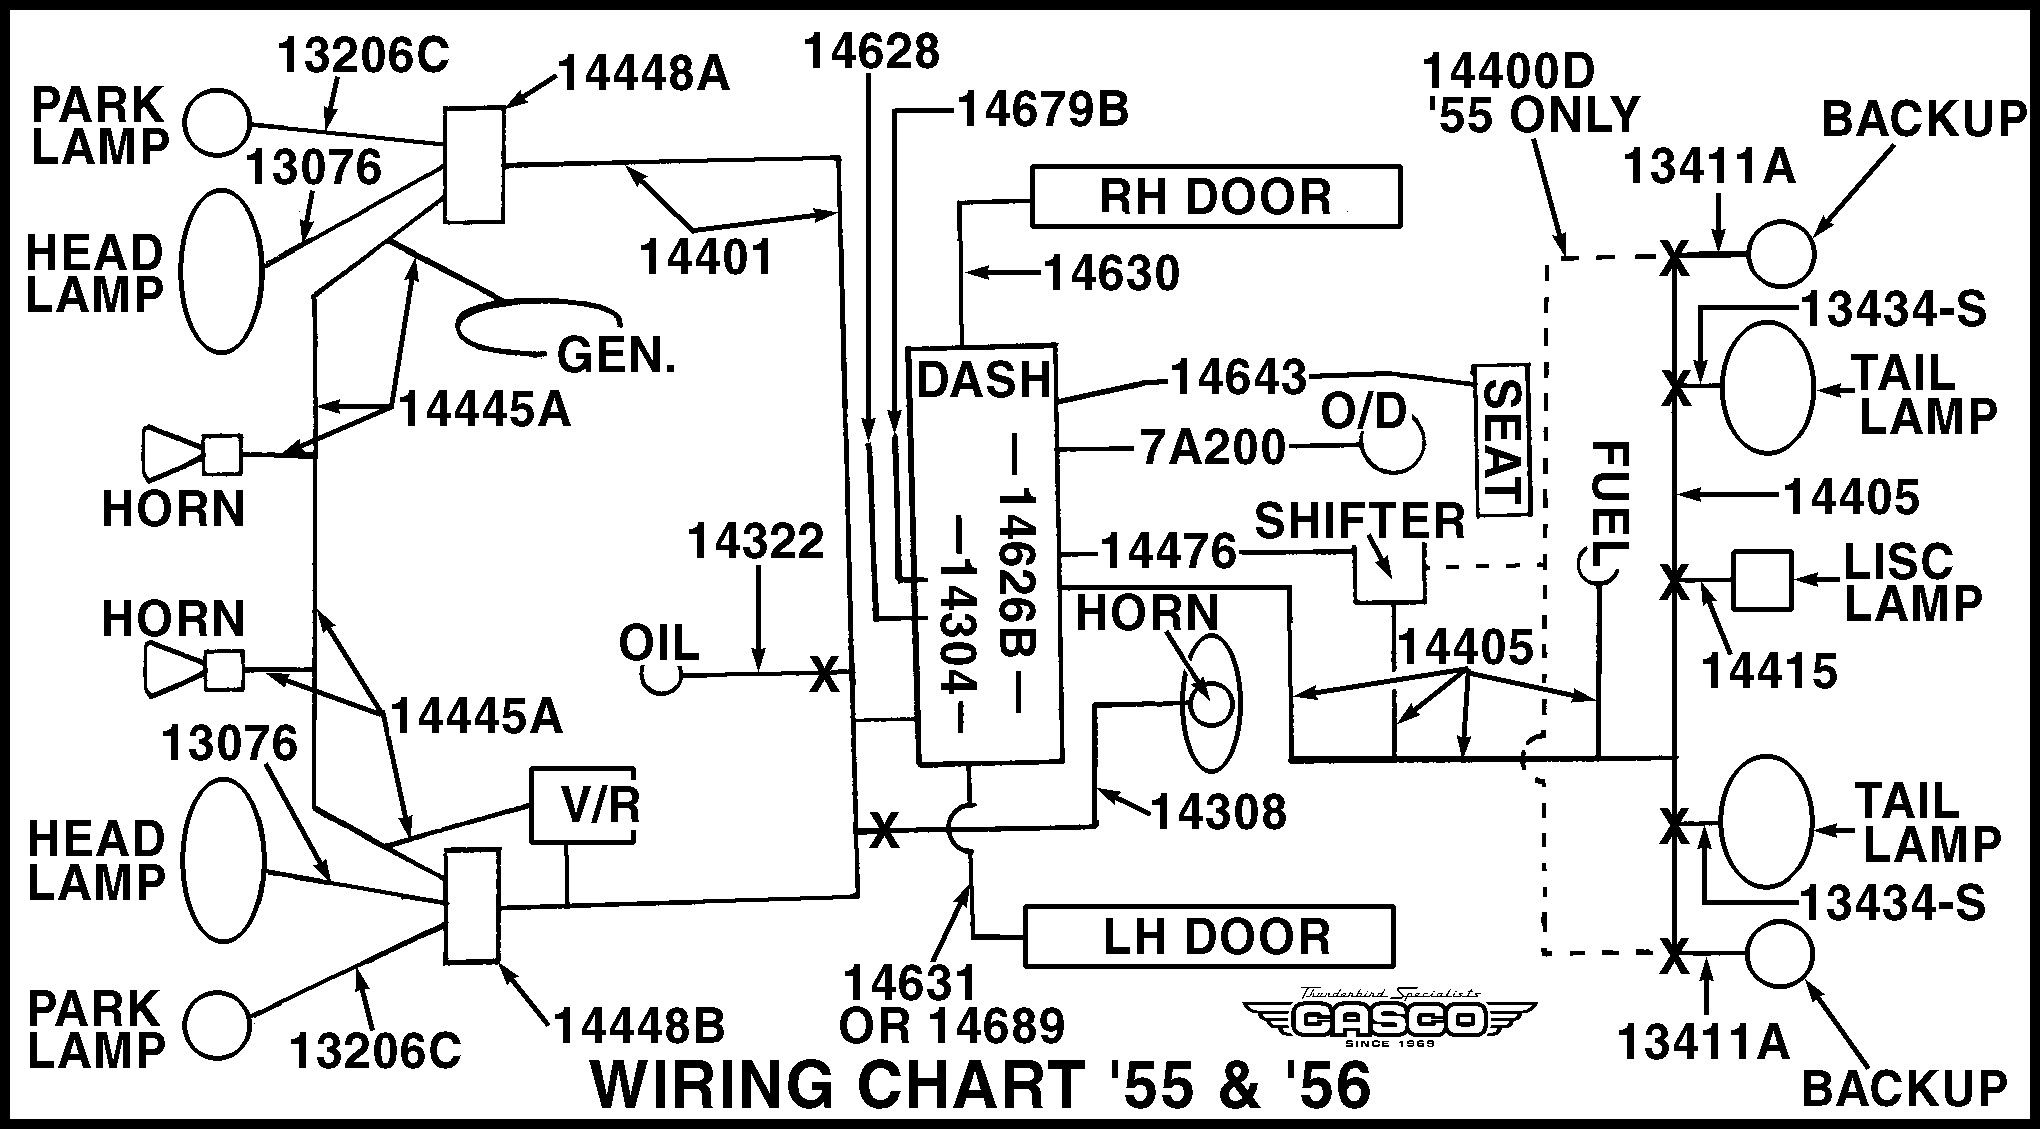 Car Engine Components Diagram Wire assembly Main Harness 55 1 Per Car Classictbird Of Car Engine Components Diagram